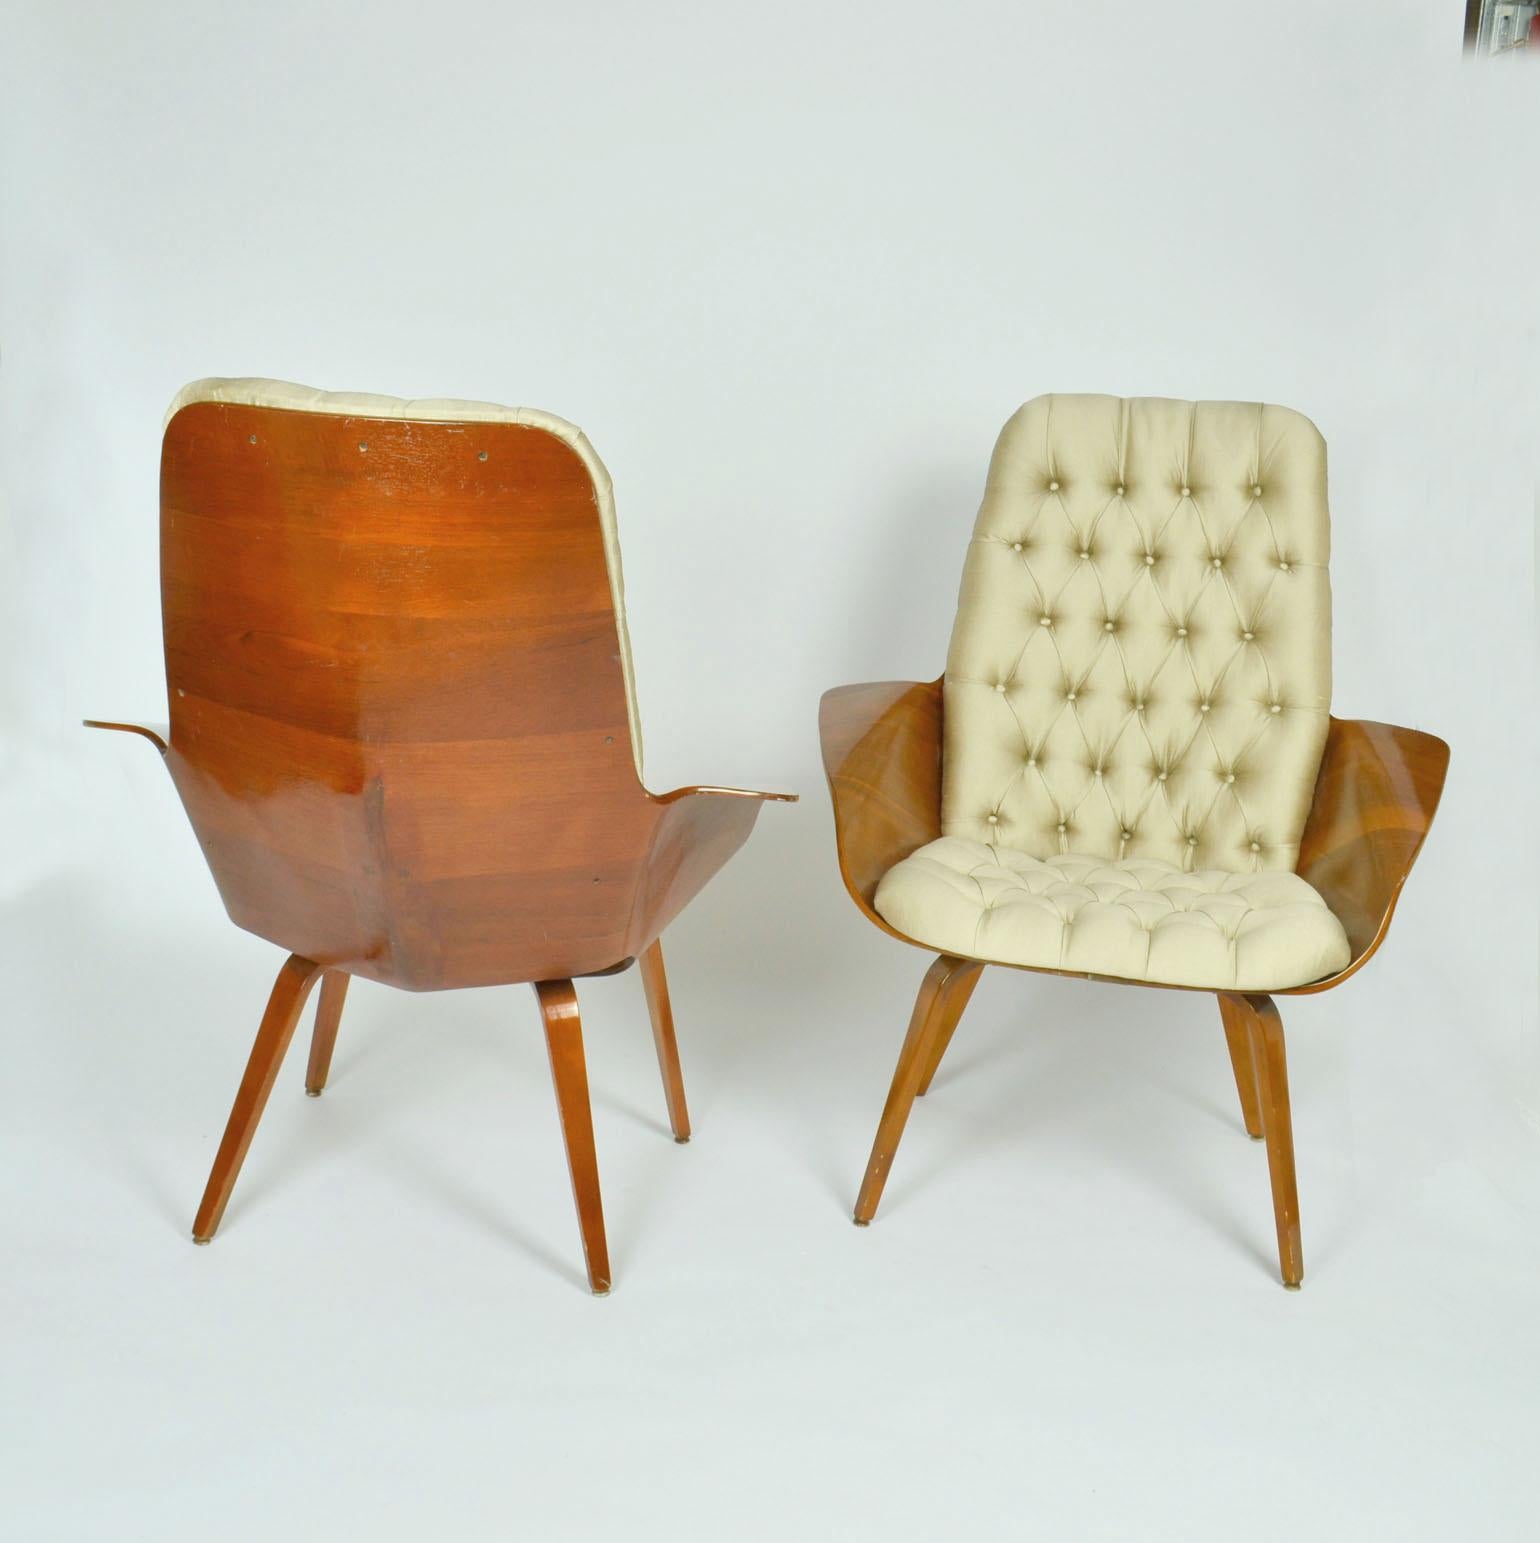 Pair of Walnut Plywood 'Mrs' Lounge Chair by George Mulhauser for Plycraft For Sale 1